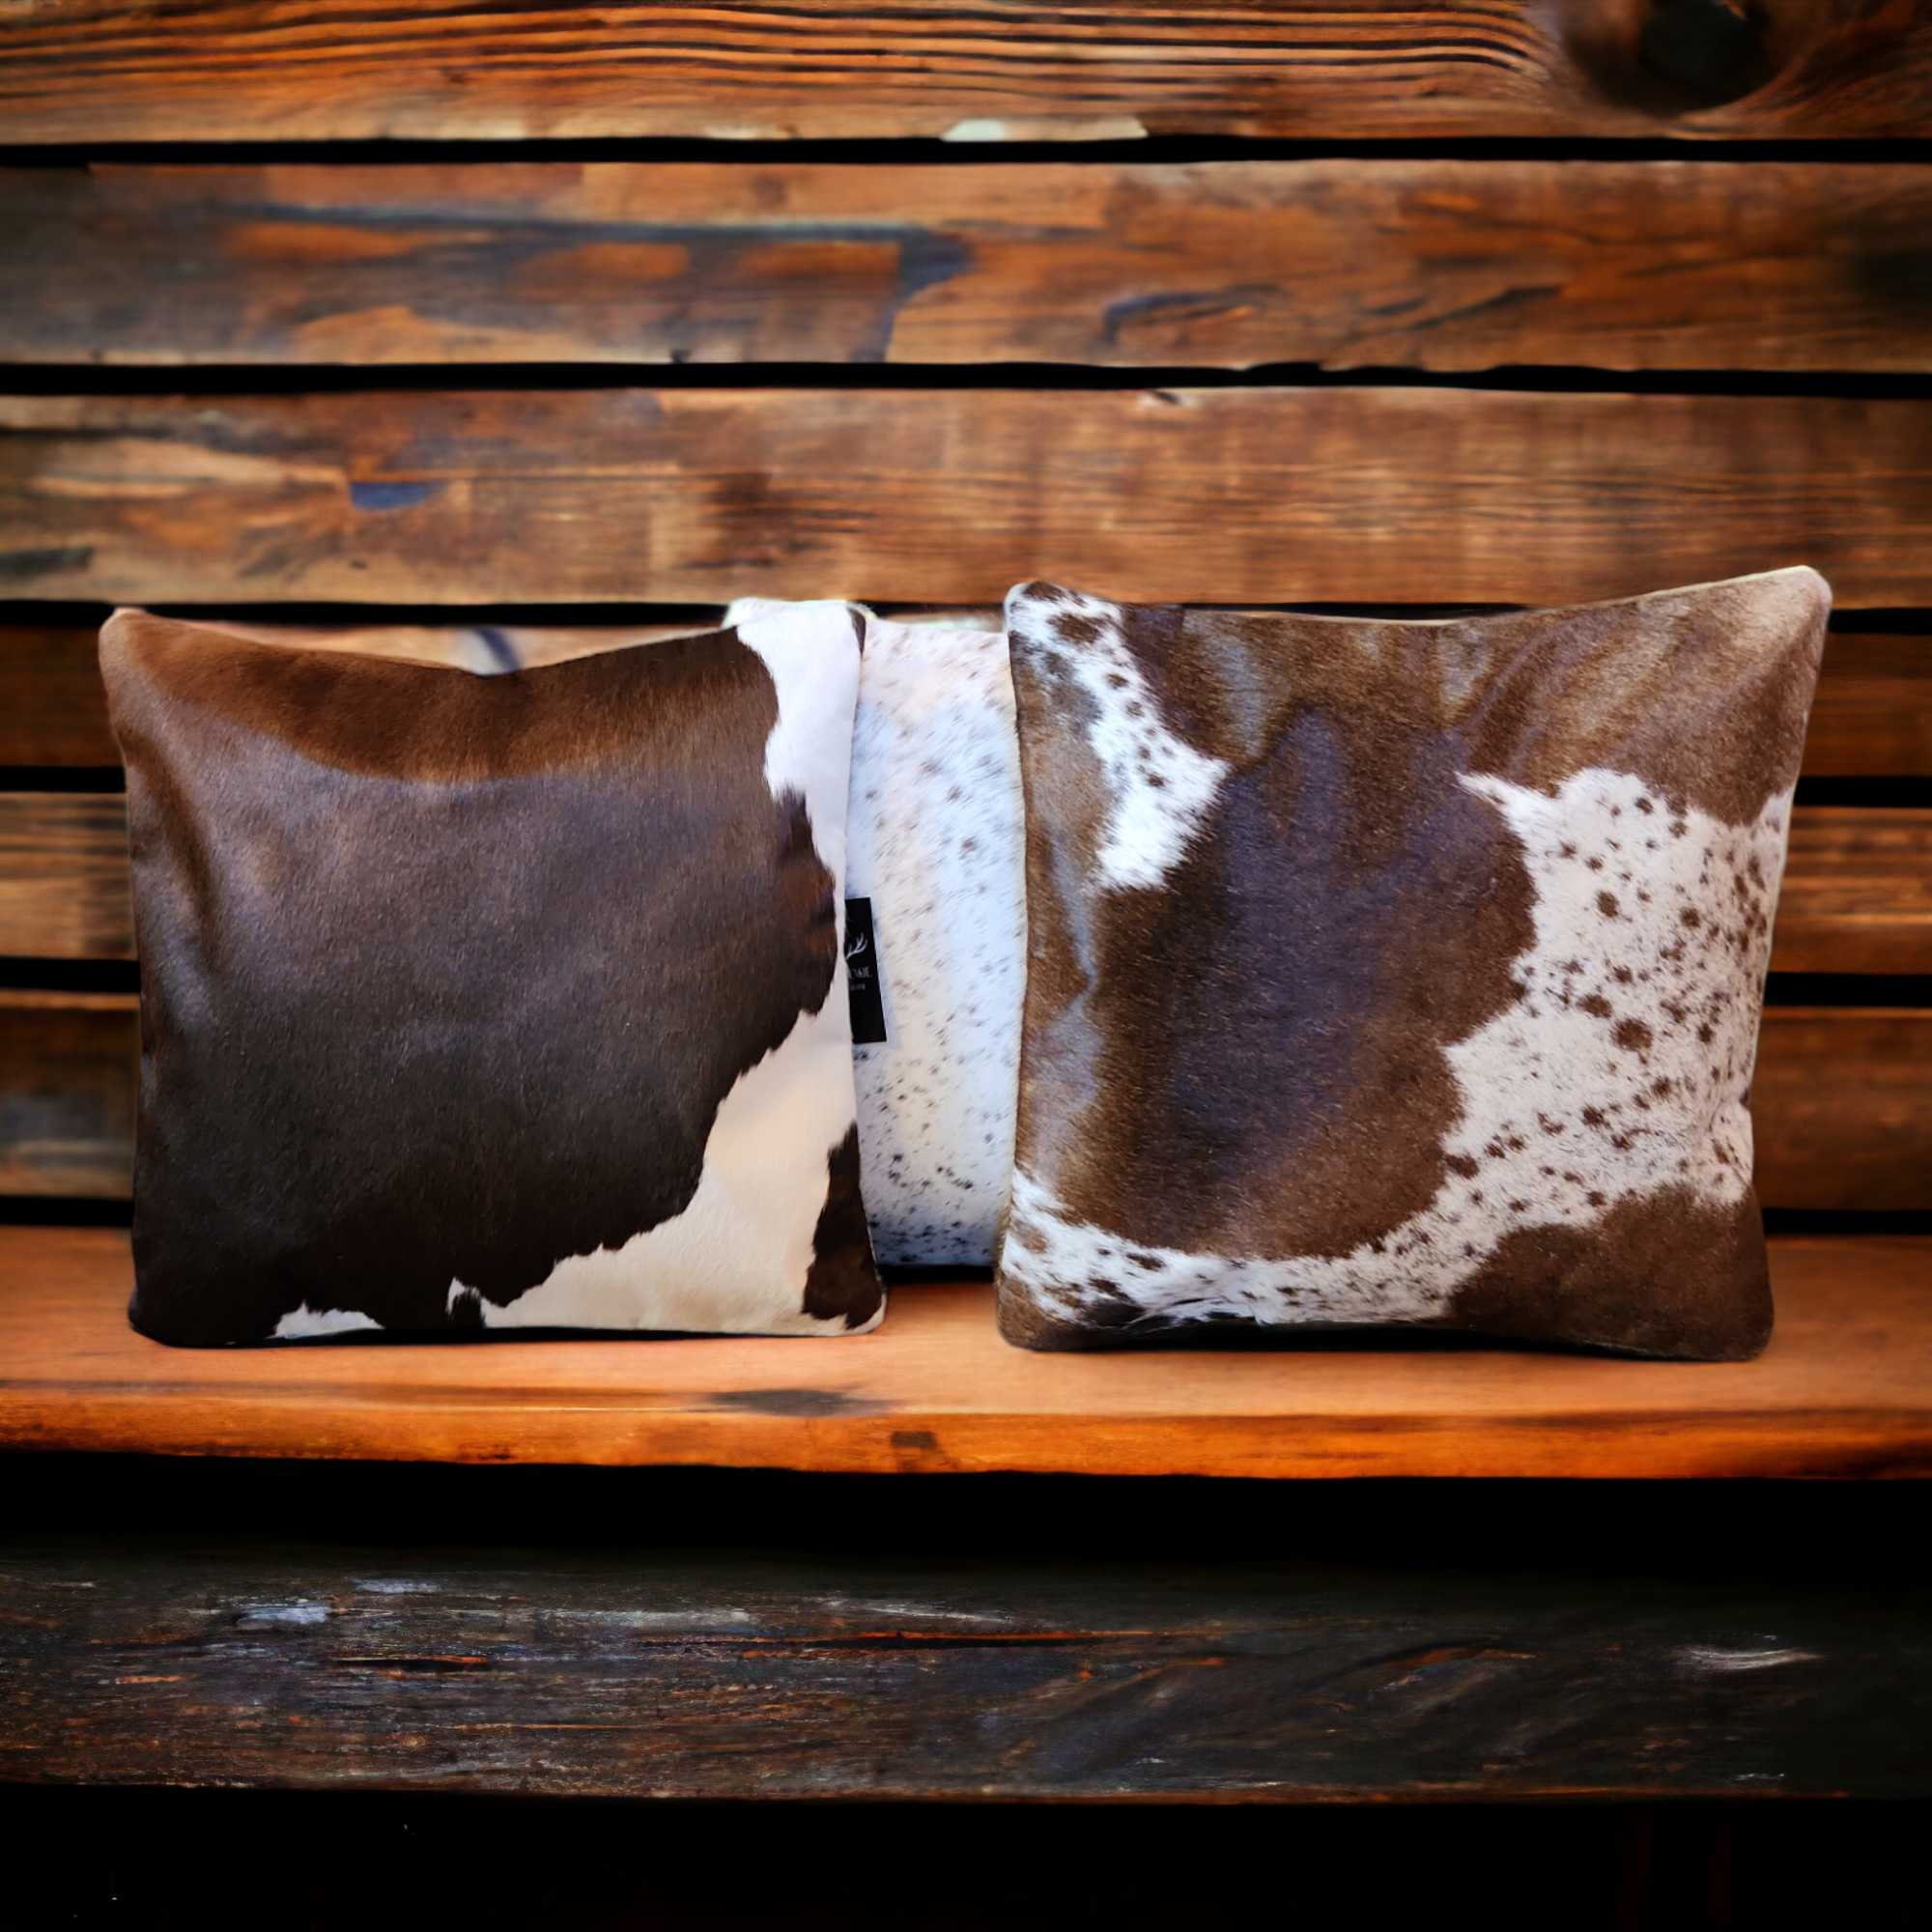 Western chic leather pillow